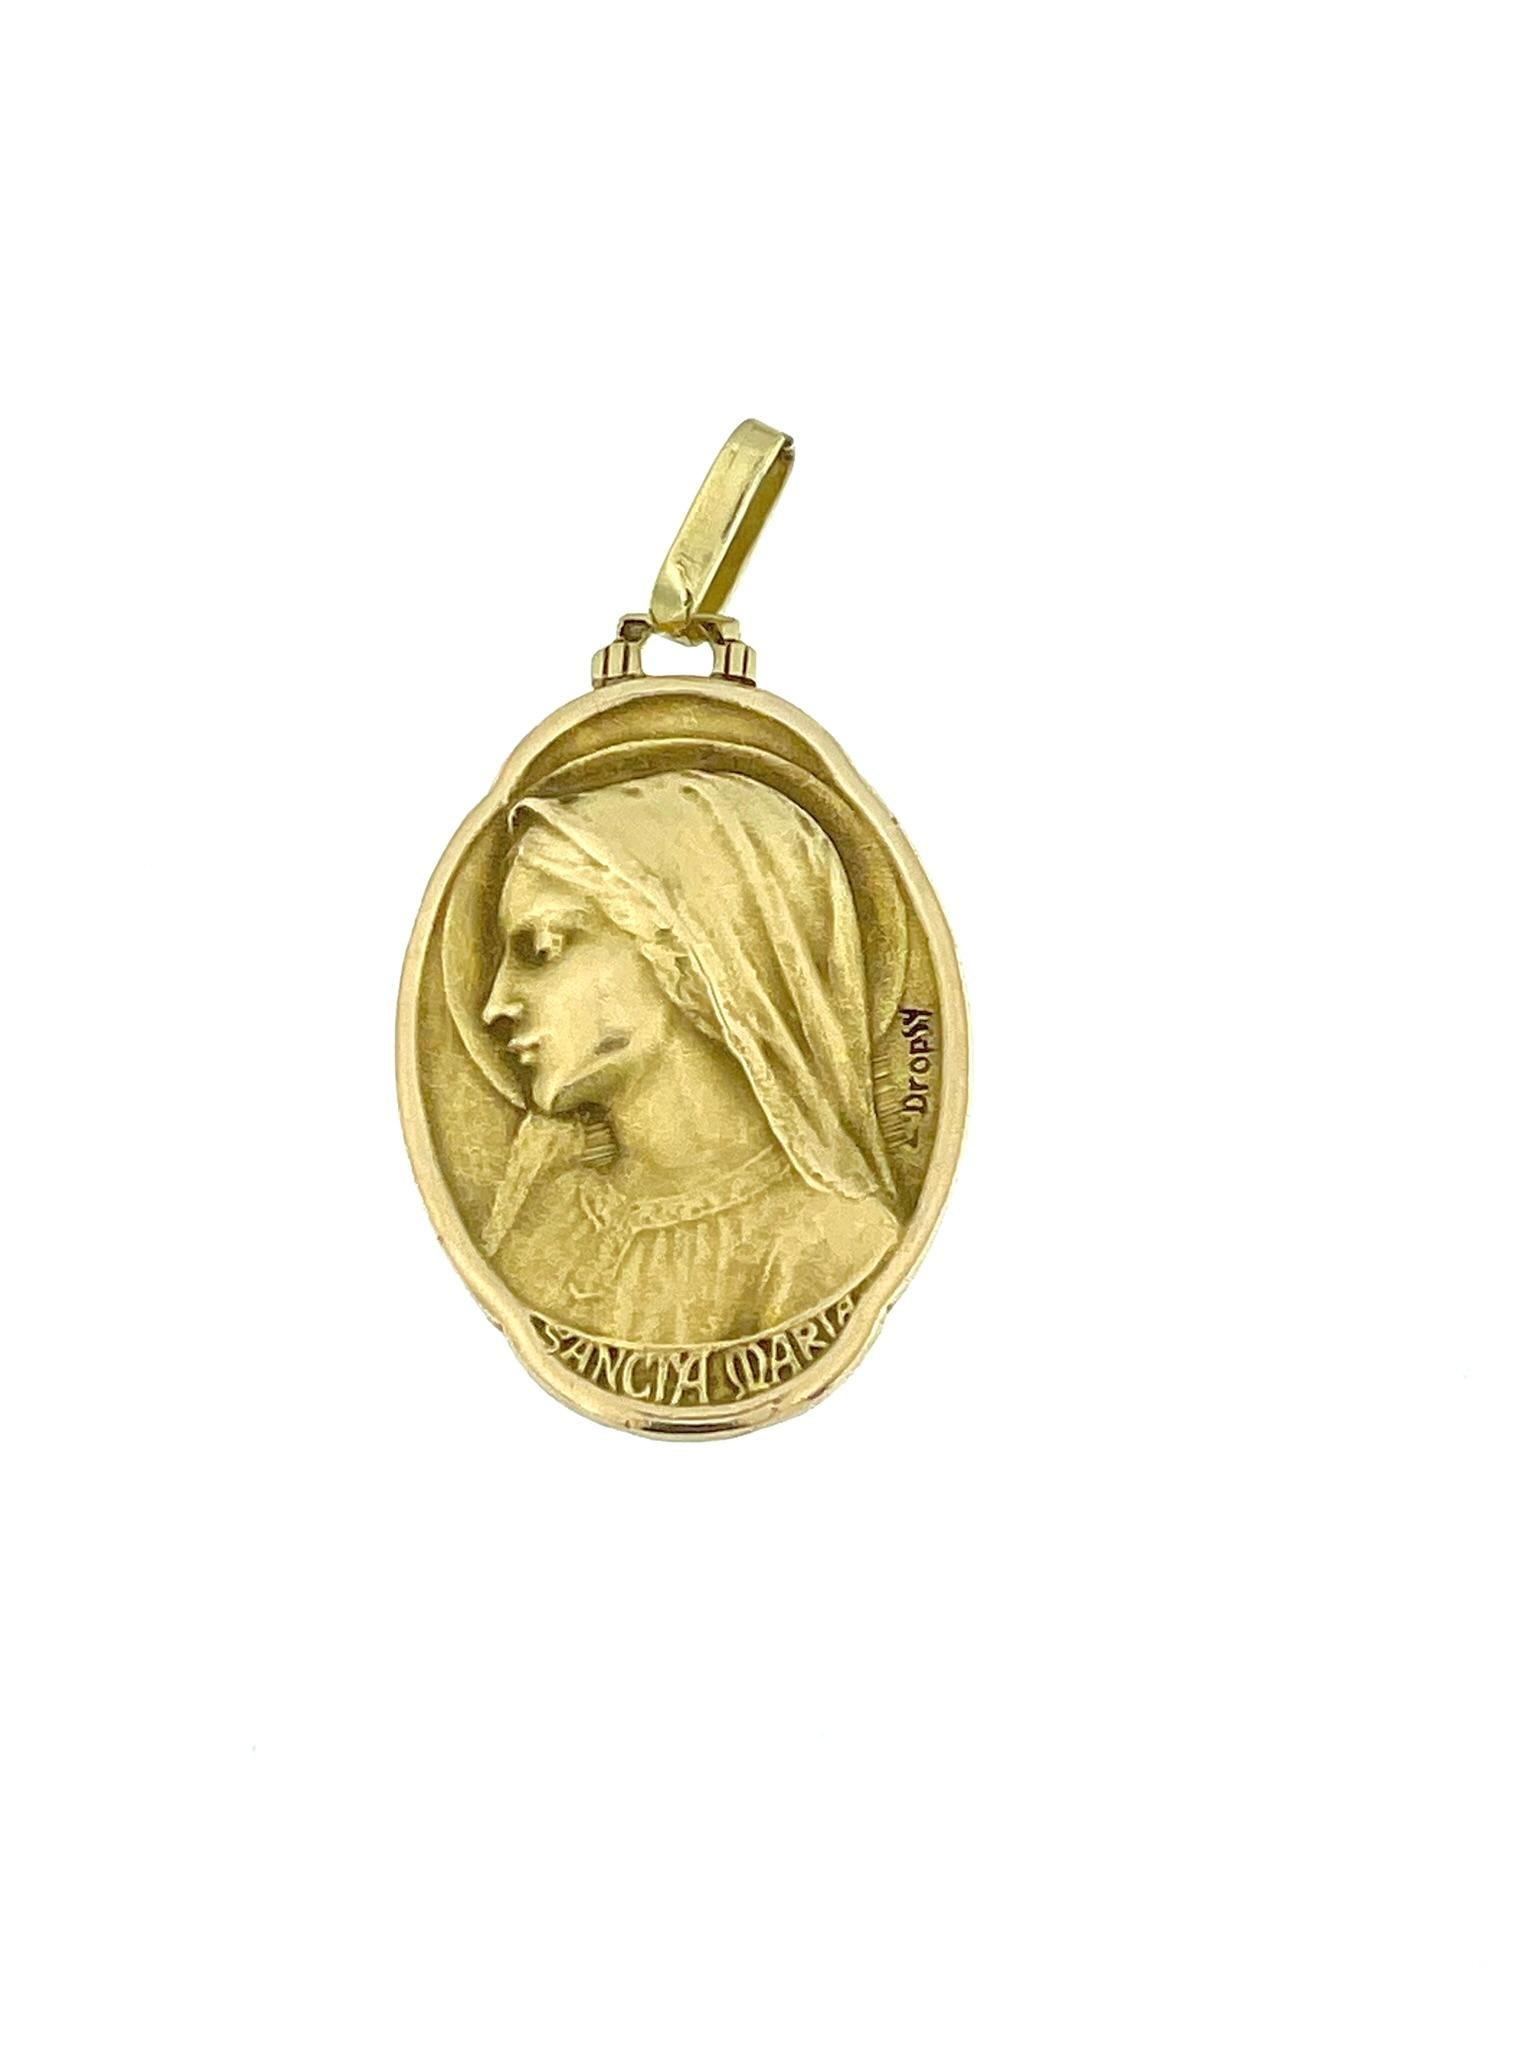 The Art Nouveau French Yellow Gold Virgin Mary Pendant, signed by E. Dropsy, is a remarkable piece of religious jewelry with a touch of artistic flair. Crafted from 18-karat yellow gold, it exudes elegance and sophistication.

The Virgin Mary, a